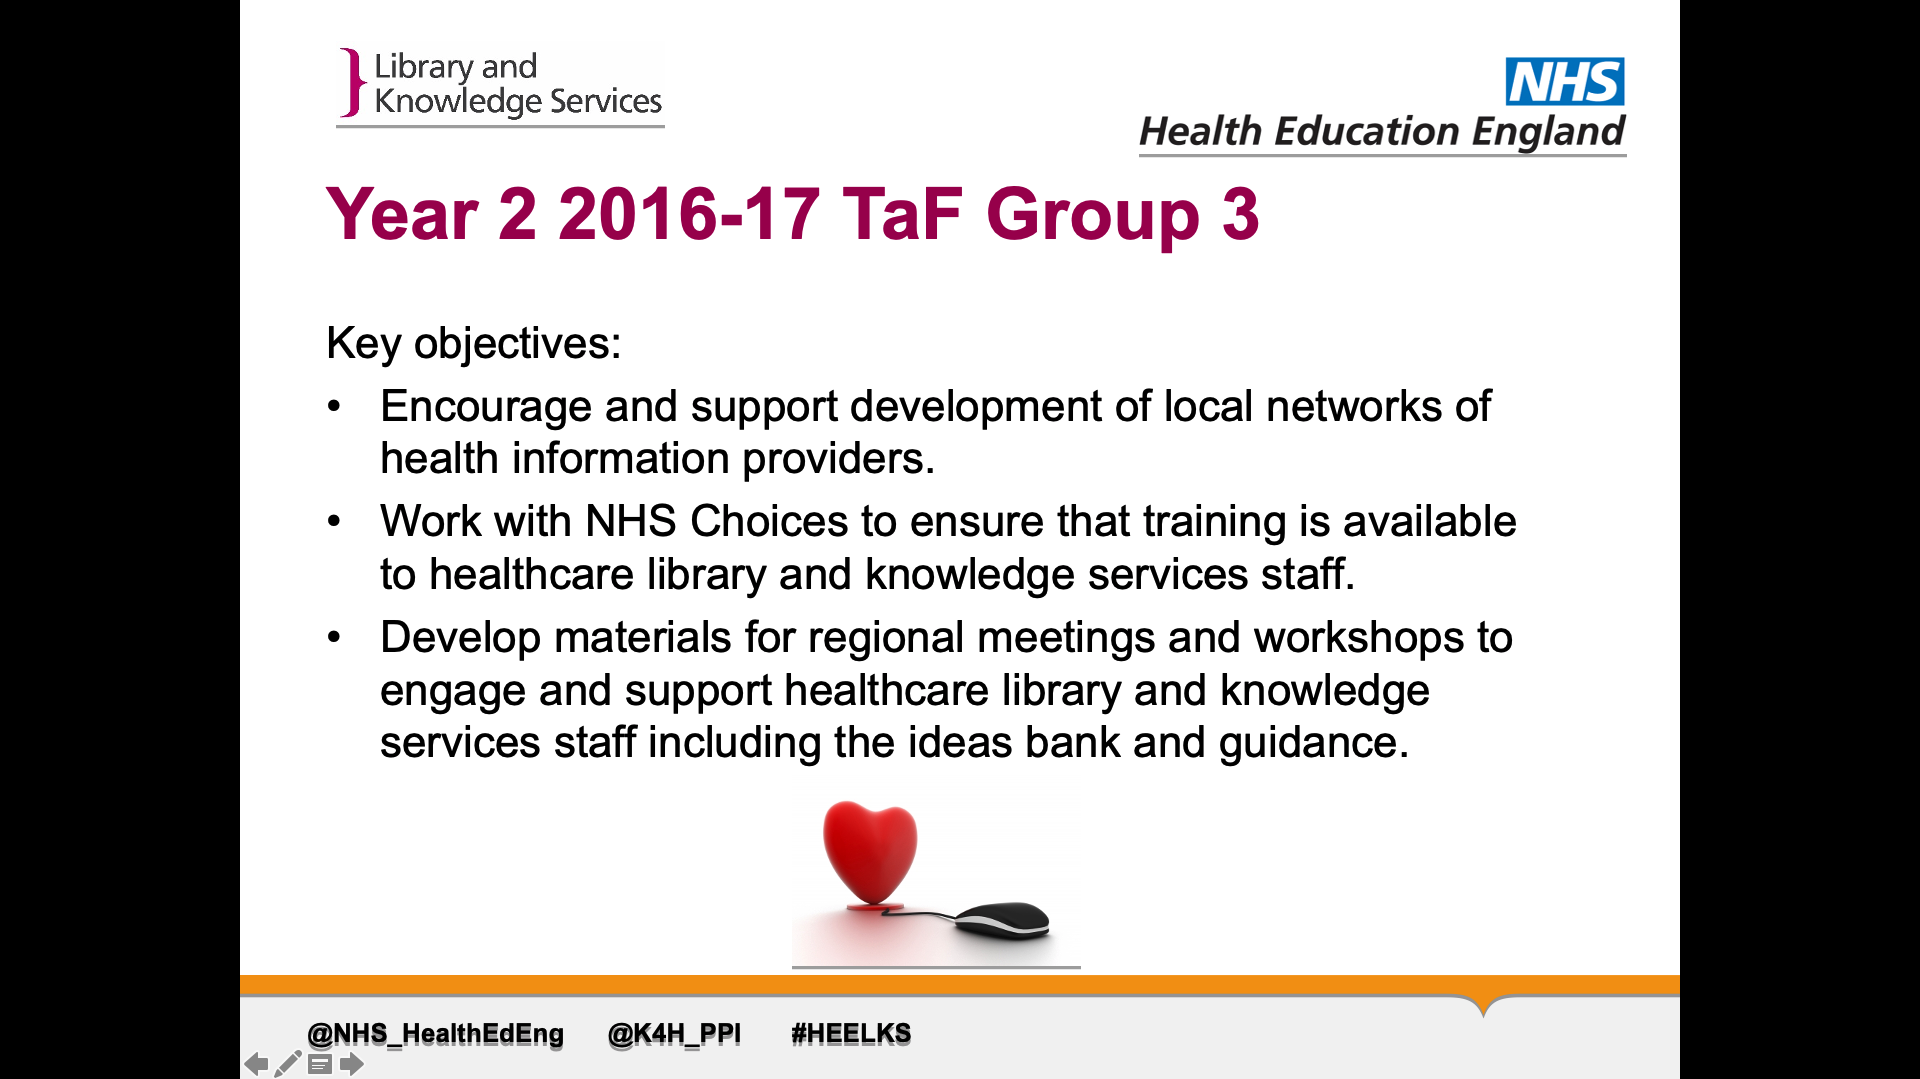 Title: Year 2 2016-17 TaF Group 3. Text on page: Key objectives: Encourage and support development of local networks of health information providers.  Work with NHS Choices to ensure that training is available to healthcare library and knowledge services staff. Develop materials for regional meetings and workshops to engage and support healthcare library and knowledge services staff including the ideas bank and guidance